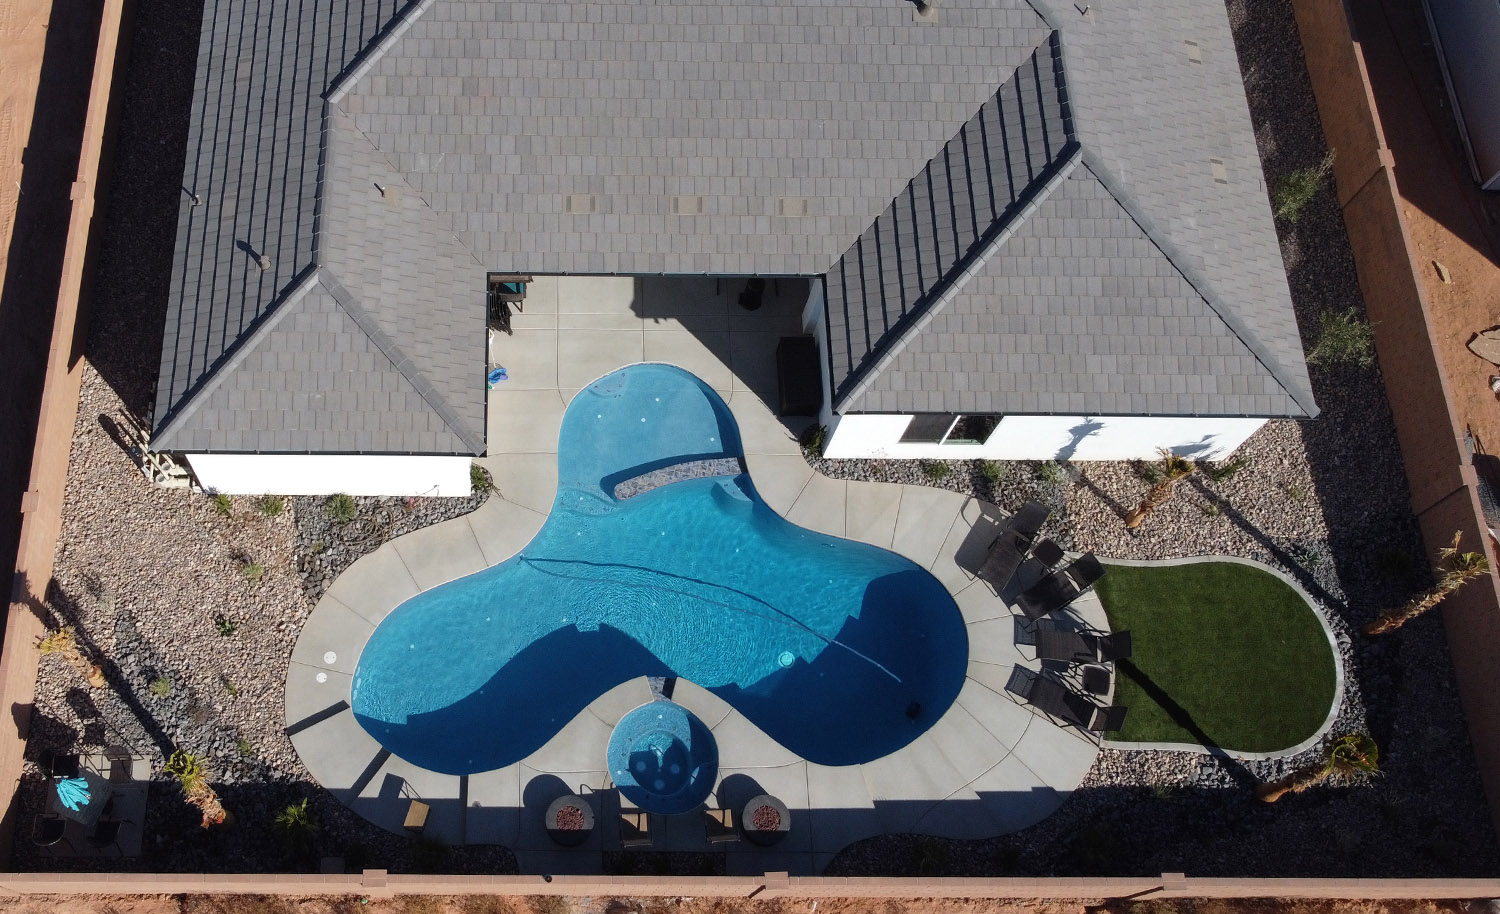 Clover shaped pool and backyard landscaping in the Little Valley area of St. George, Utah.